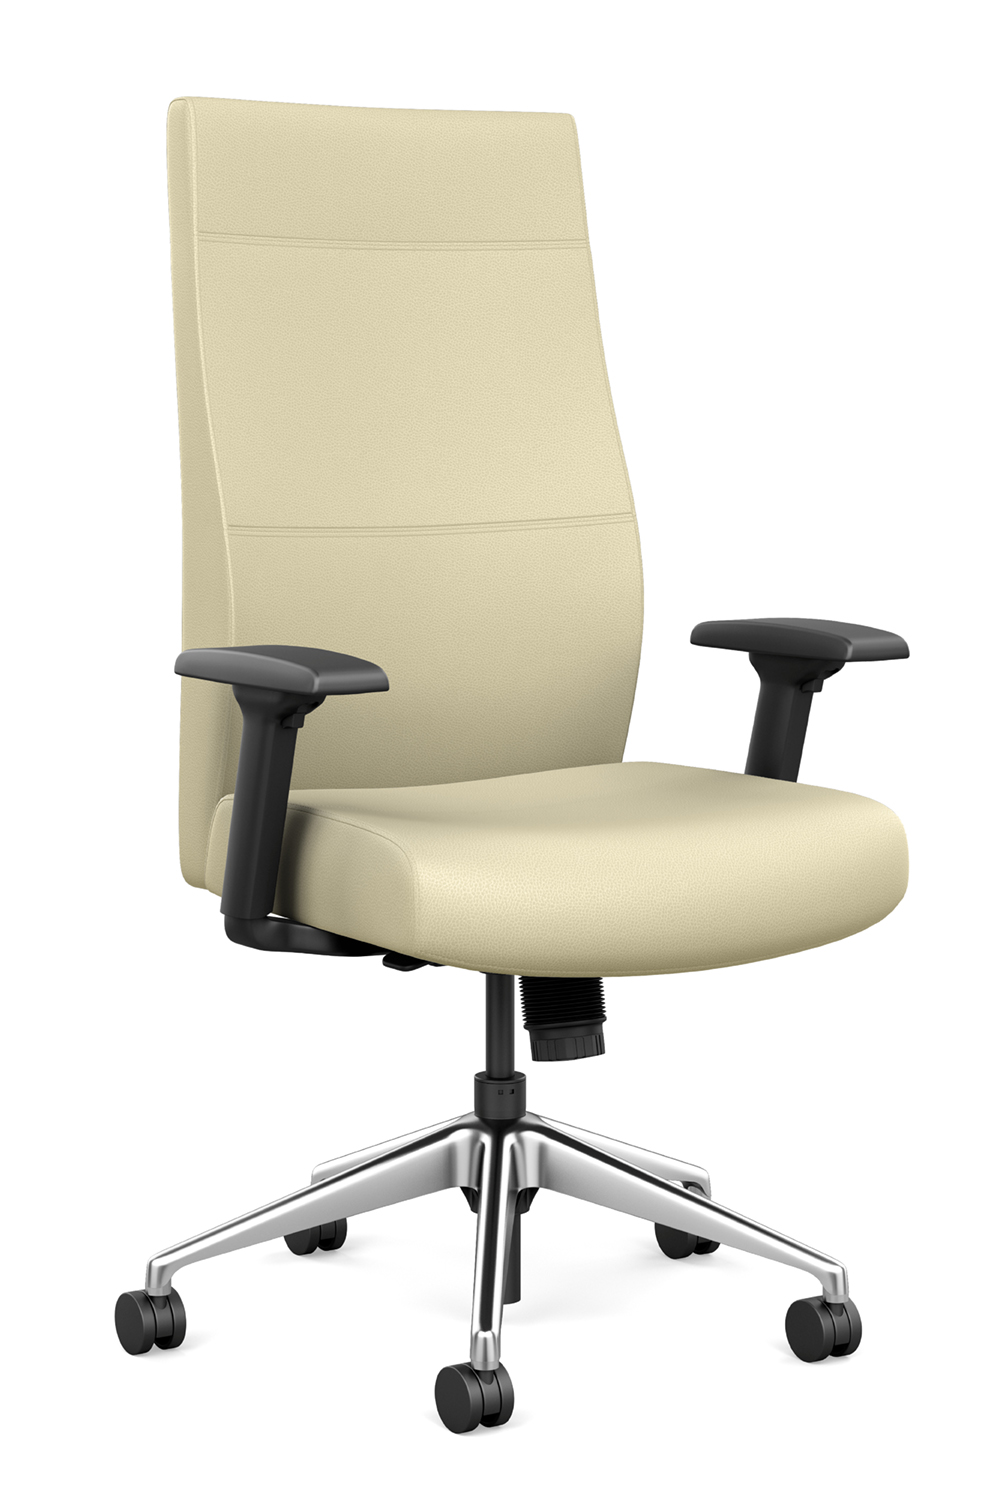 SitOnIt Seating Prava Chair - Clean & Professional Office Seating